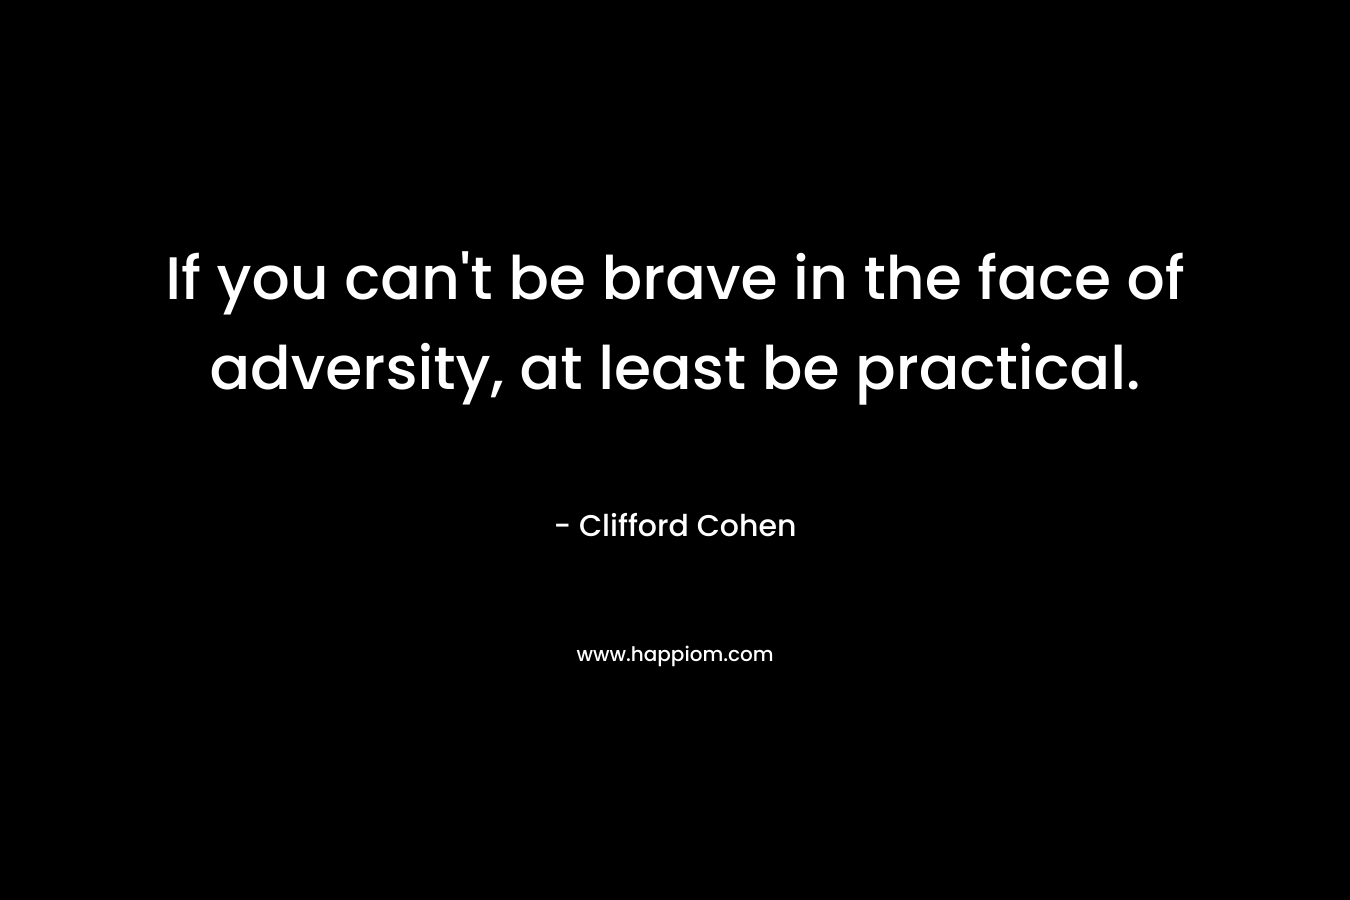 If you can’t be brave in the face of adversity, at least be practical. – Clifford Cohen